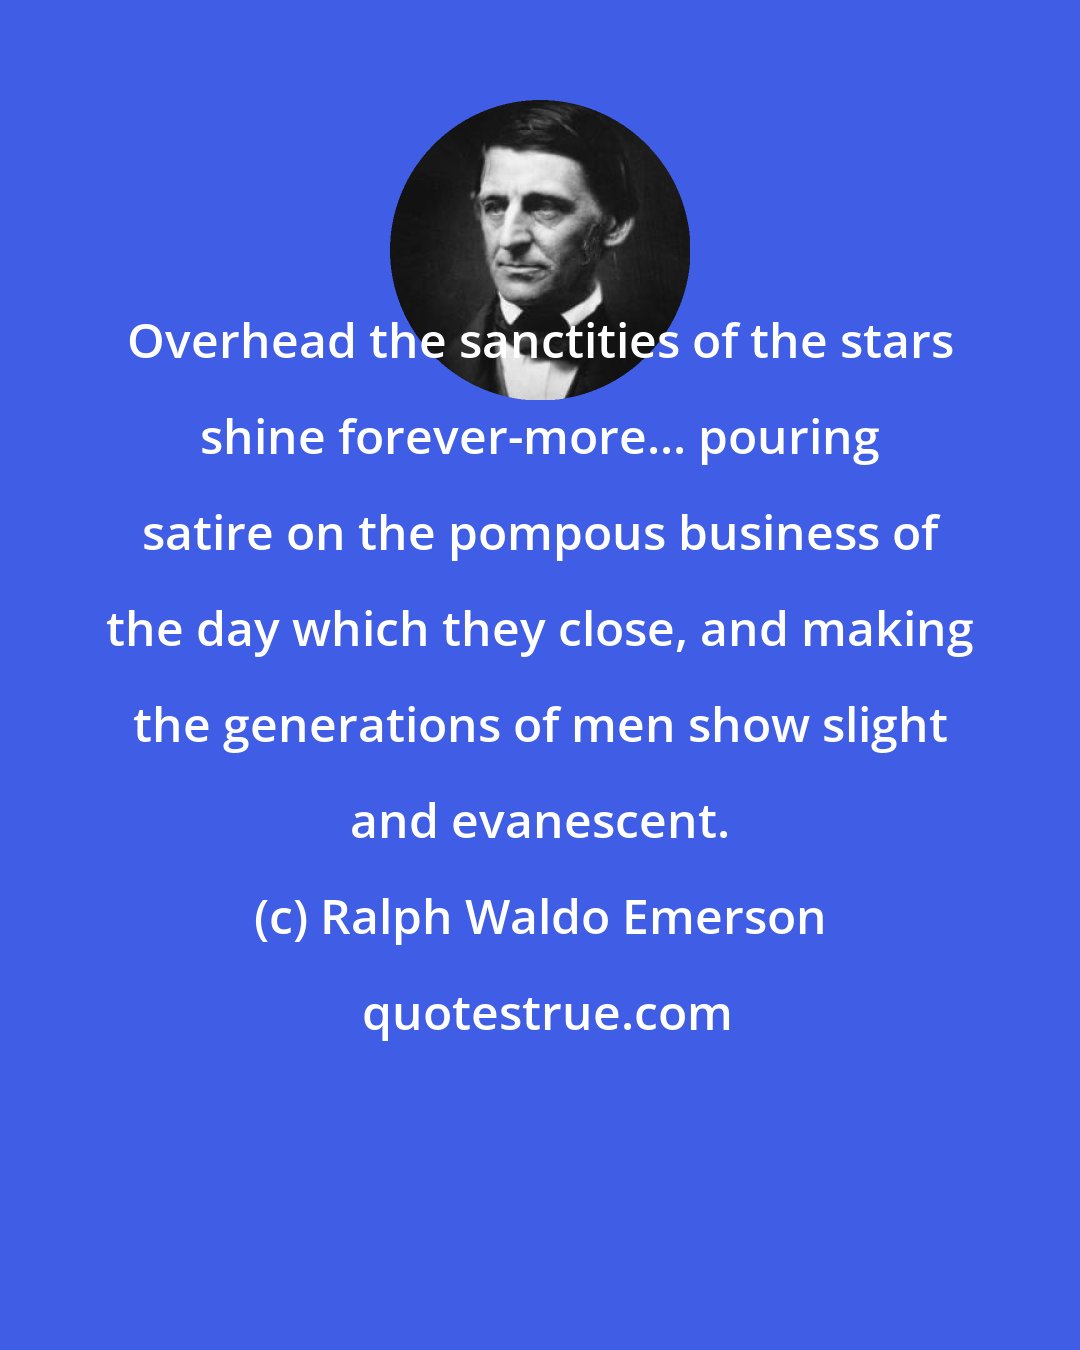 Ralph Waldo Emerson: Overhead the sanctities of the stars shine forever-more... pouring satire on the pompous business of the day which they close, and making the generations of men show slight and evanescent.